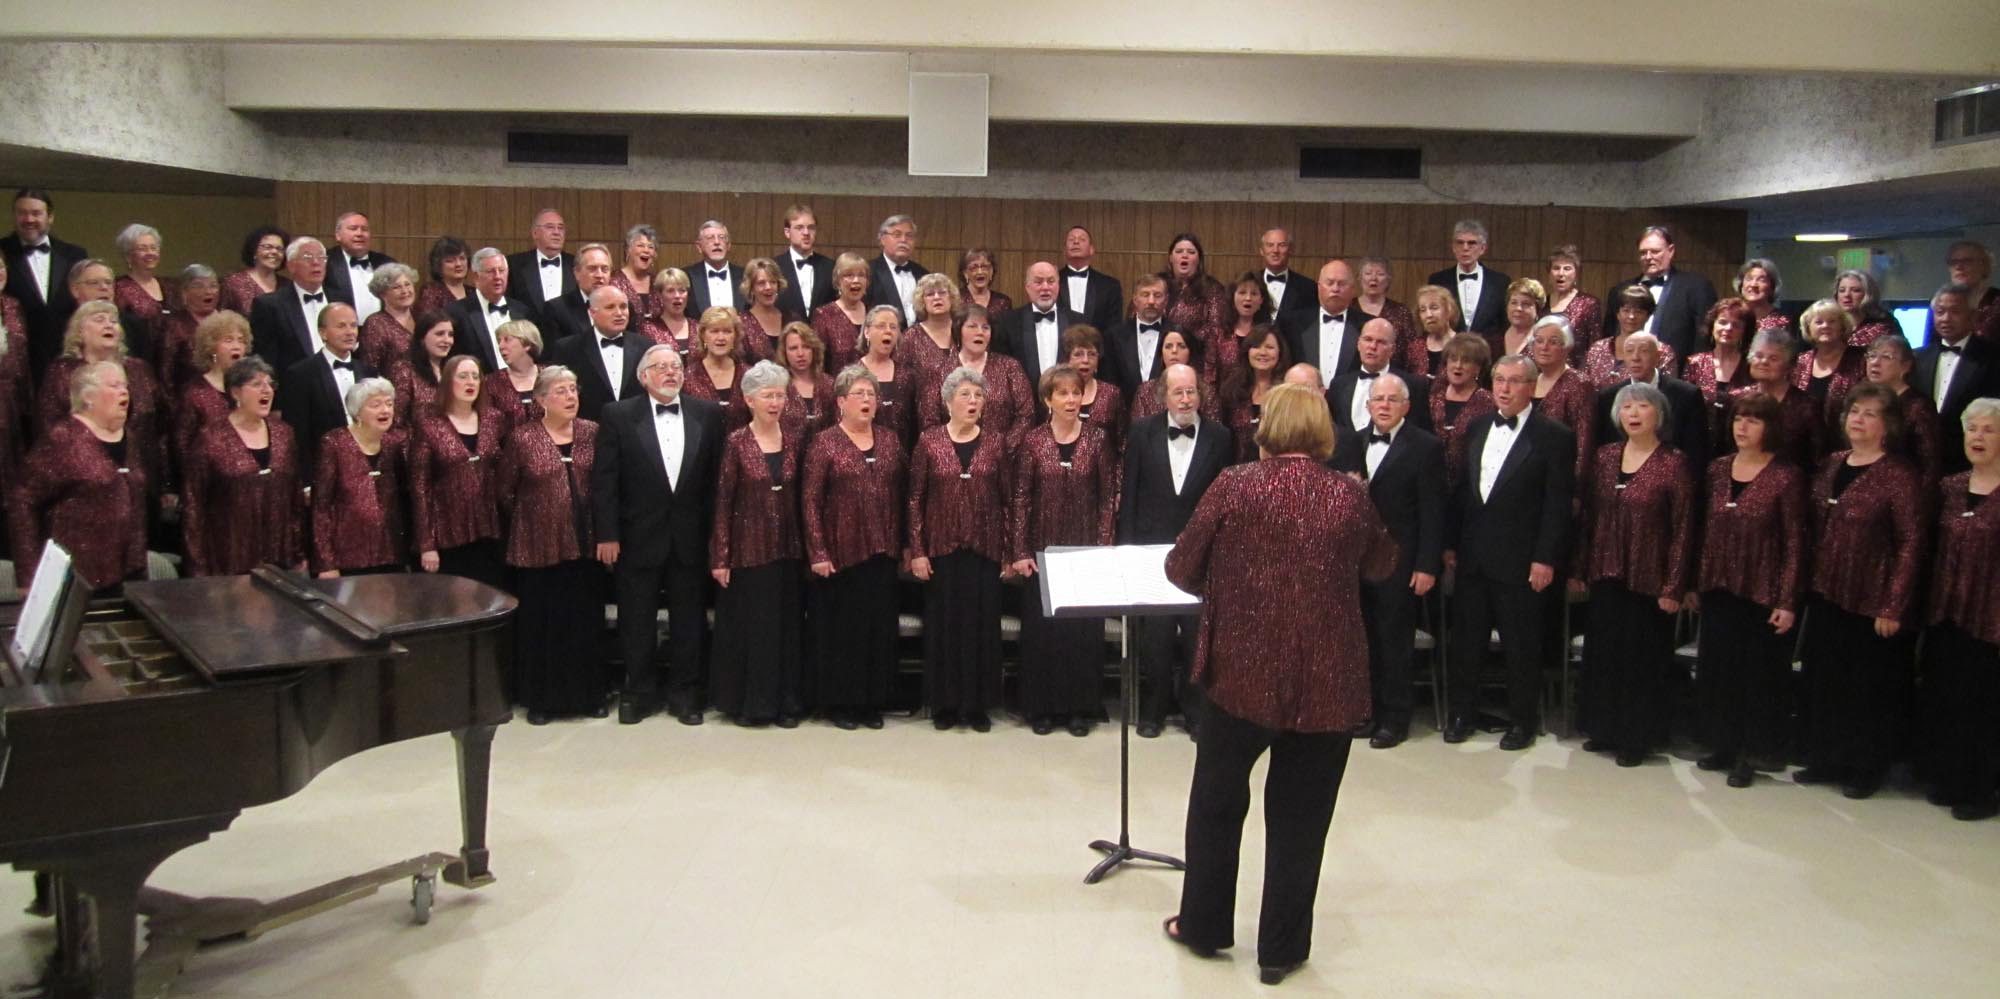 Vancouver USA Singers, under the direction of Jana Hart, will perform a Christmas concert Saturday and Sunday at First Presbyterian Church in Vancouver.